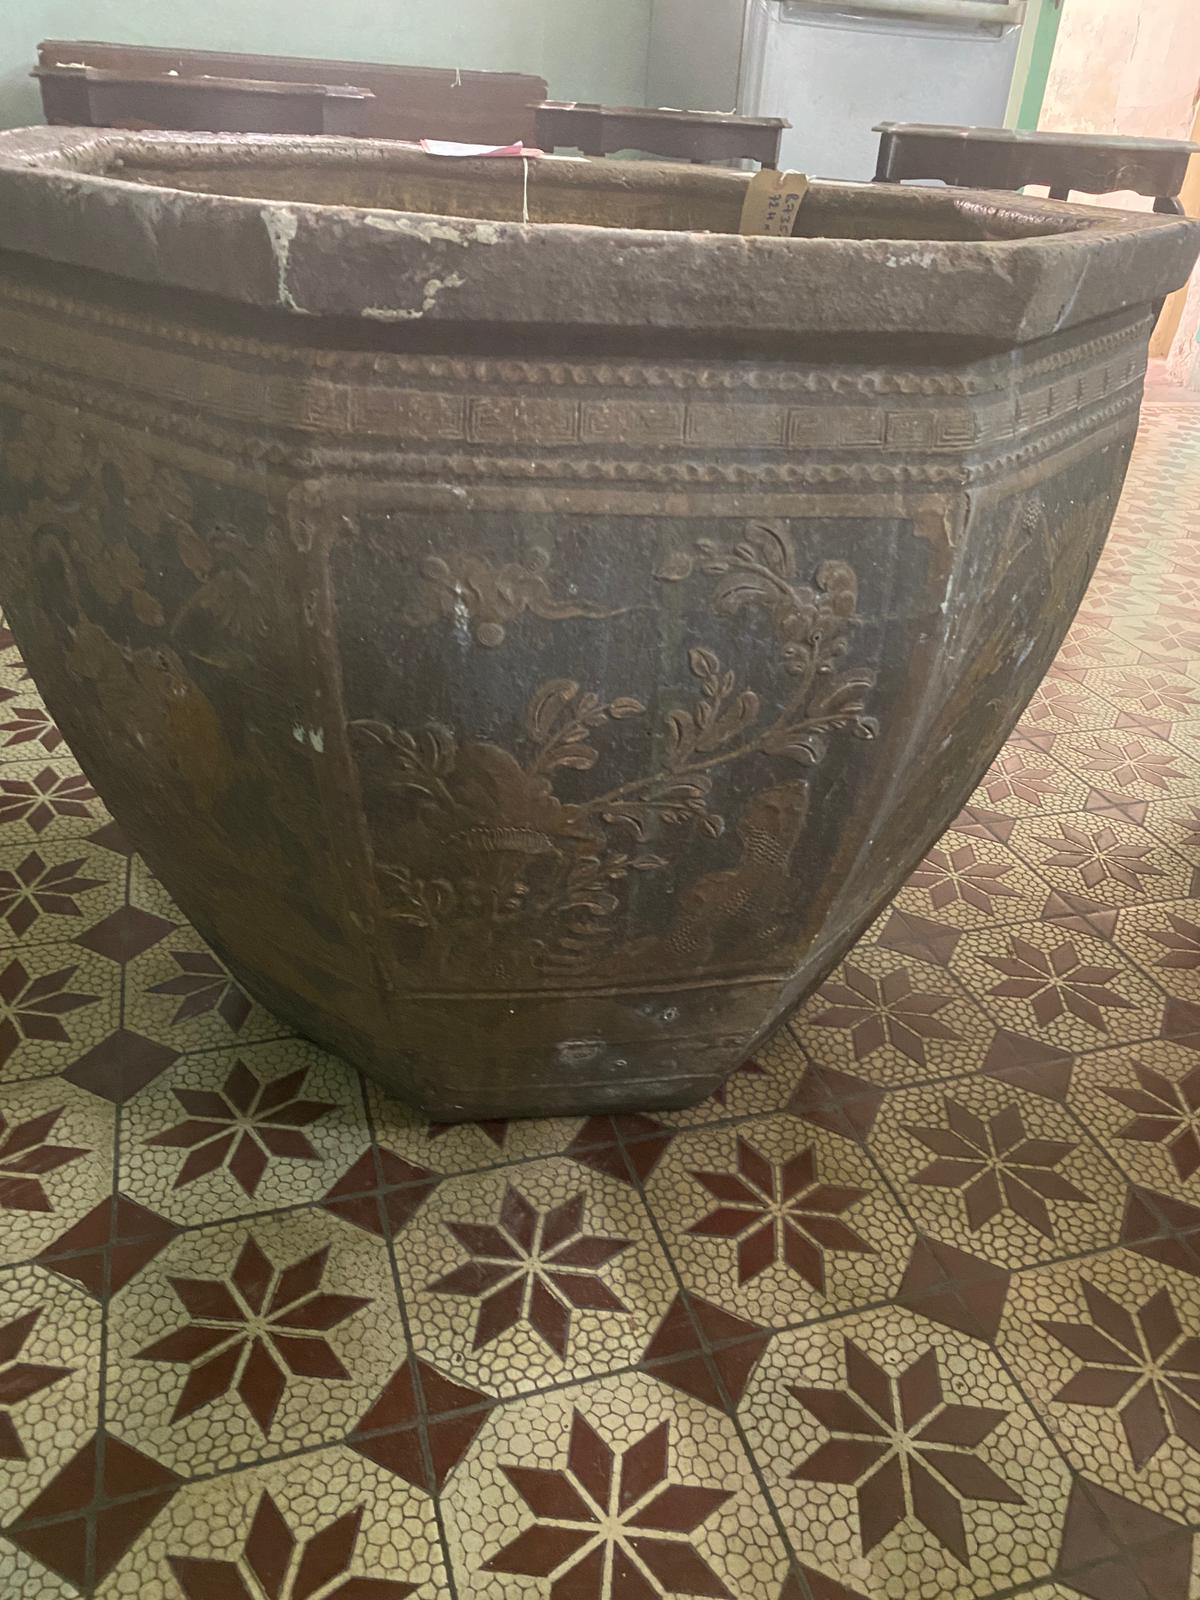 A LARGE HEXAGONAL BROWN GLAZED JARDINIERE - Image 10 of 12